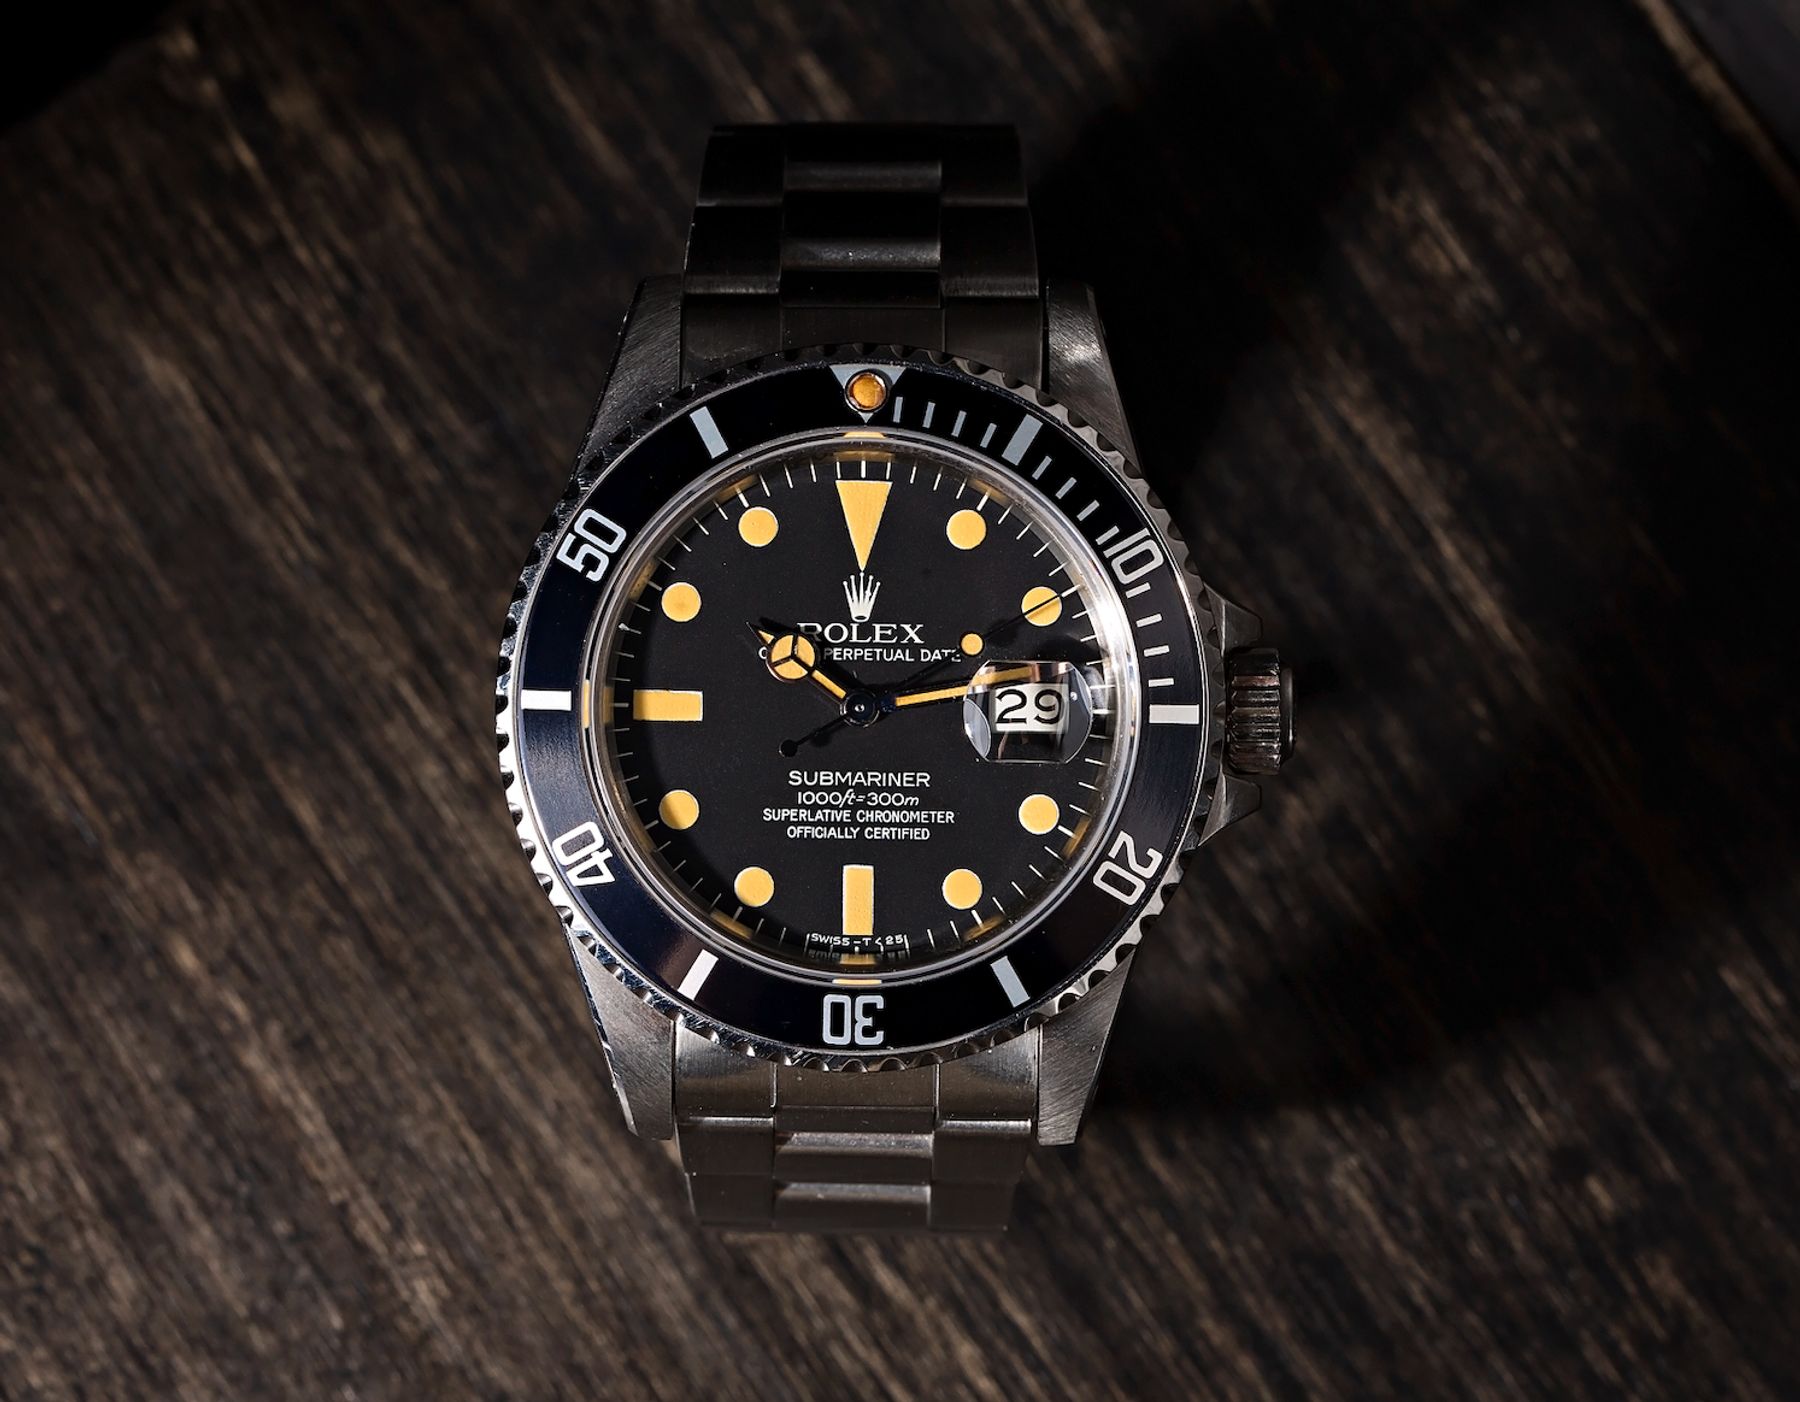 The Submariner 16800 Is Not Just A Timepiece. It Has Evolved Over Time